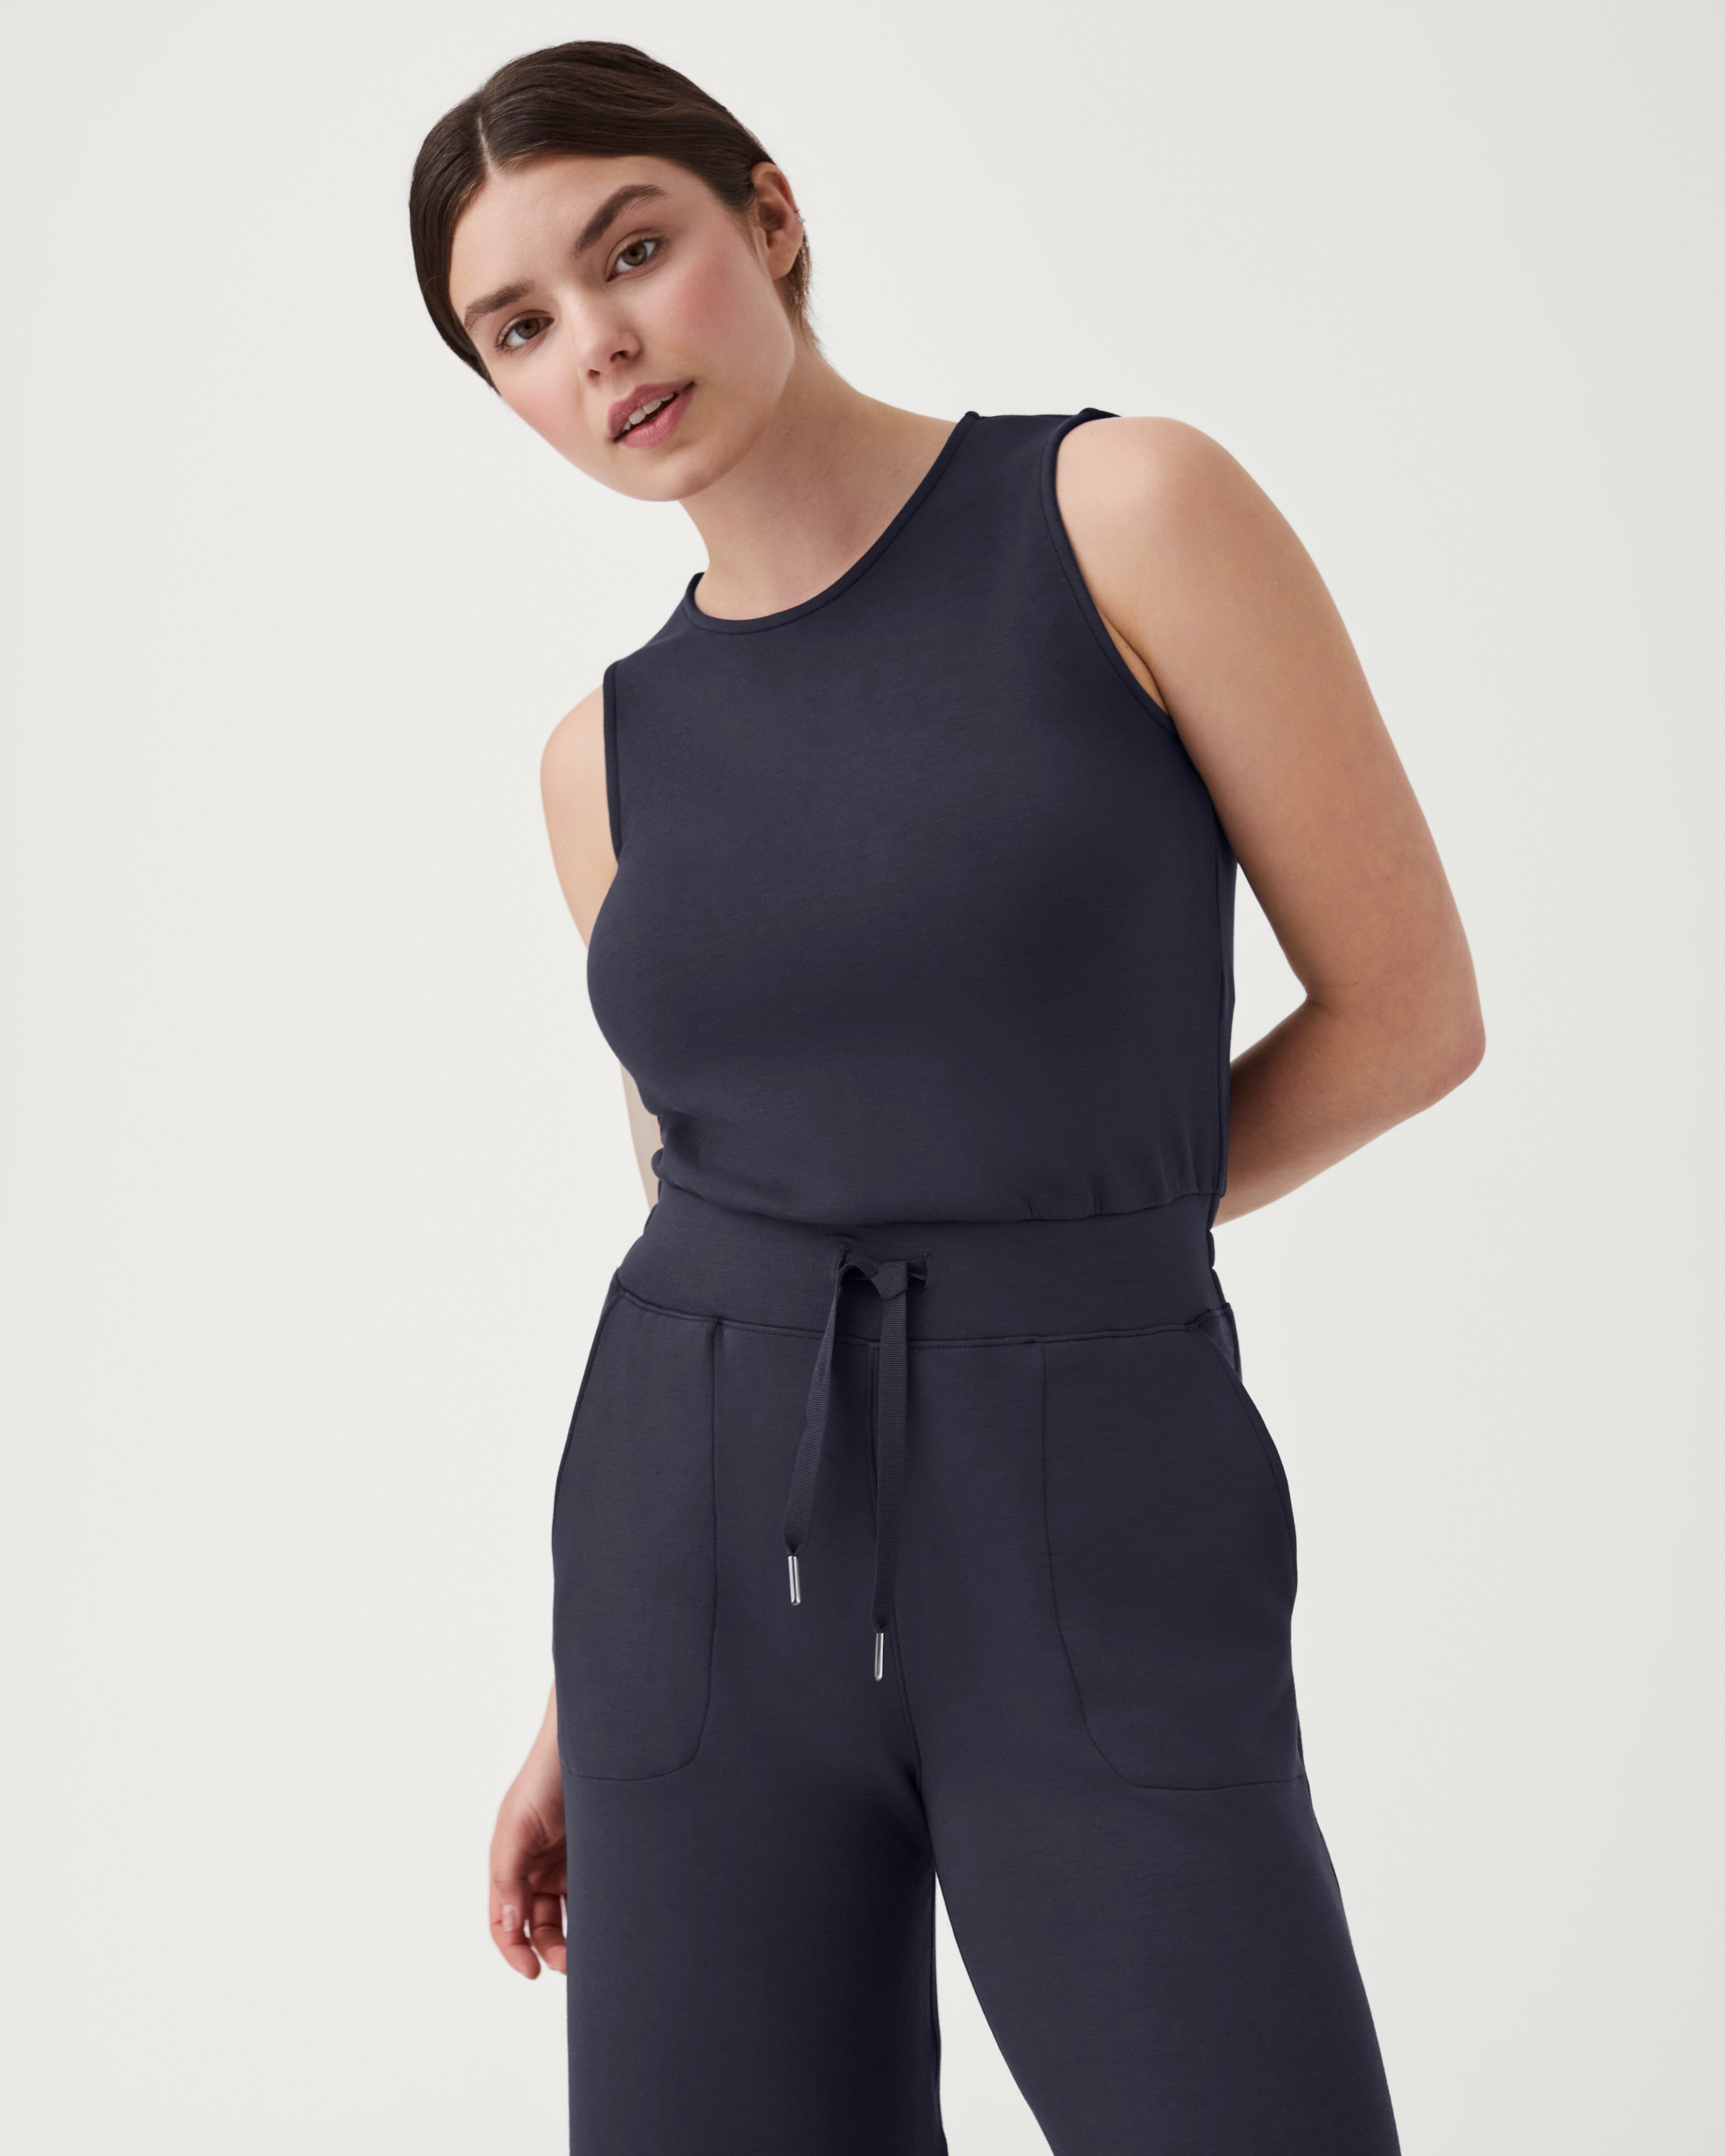 Everyone's favorite AIR ESSENTIALS JUMPSUIT in a new color- HAZY GREY